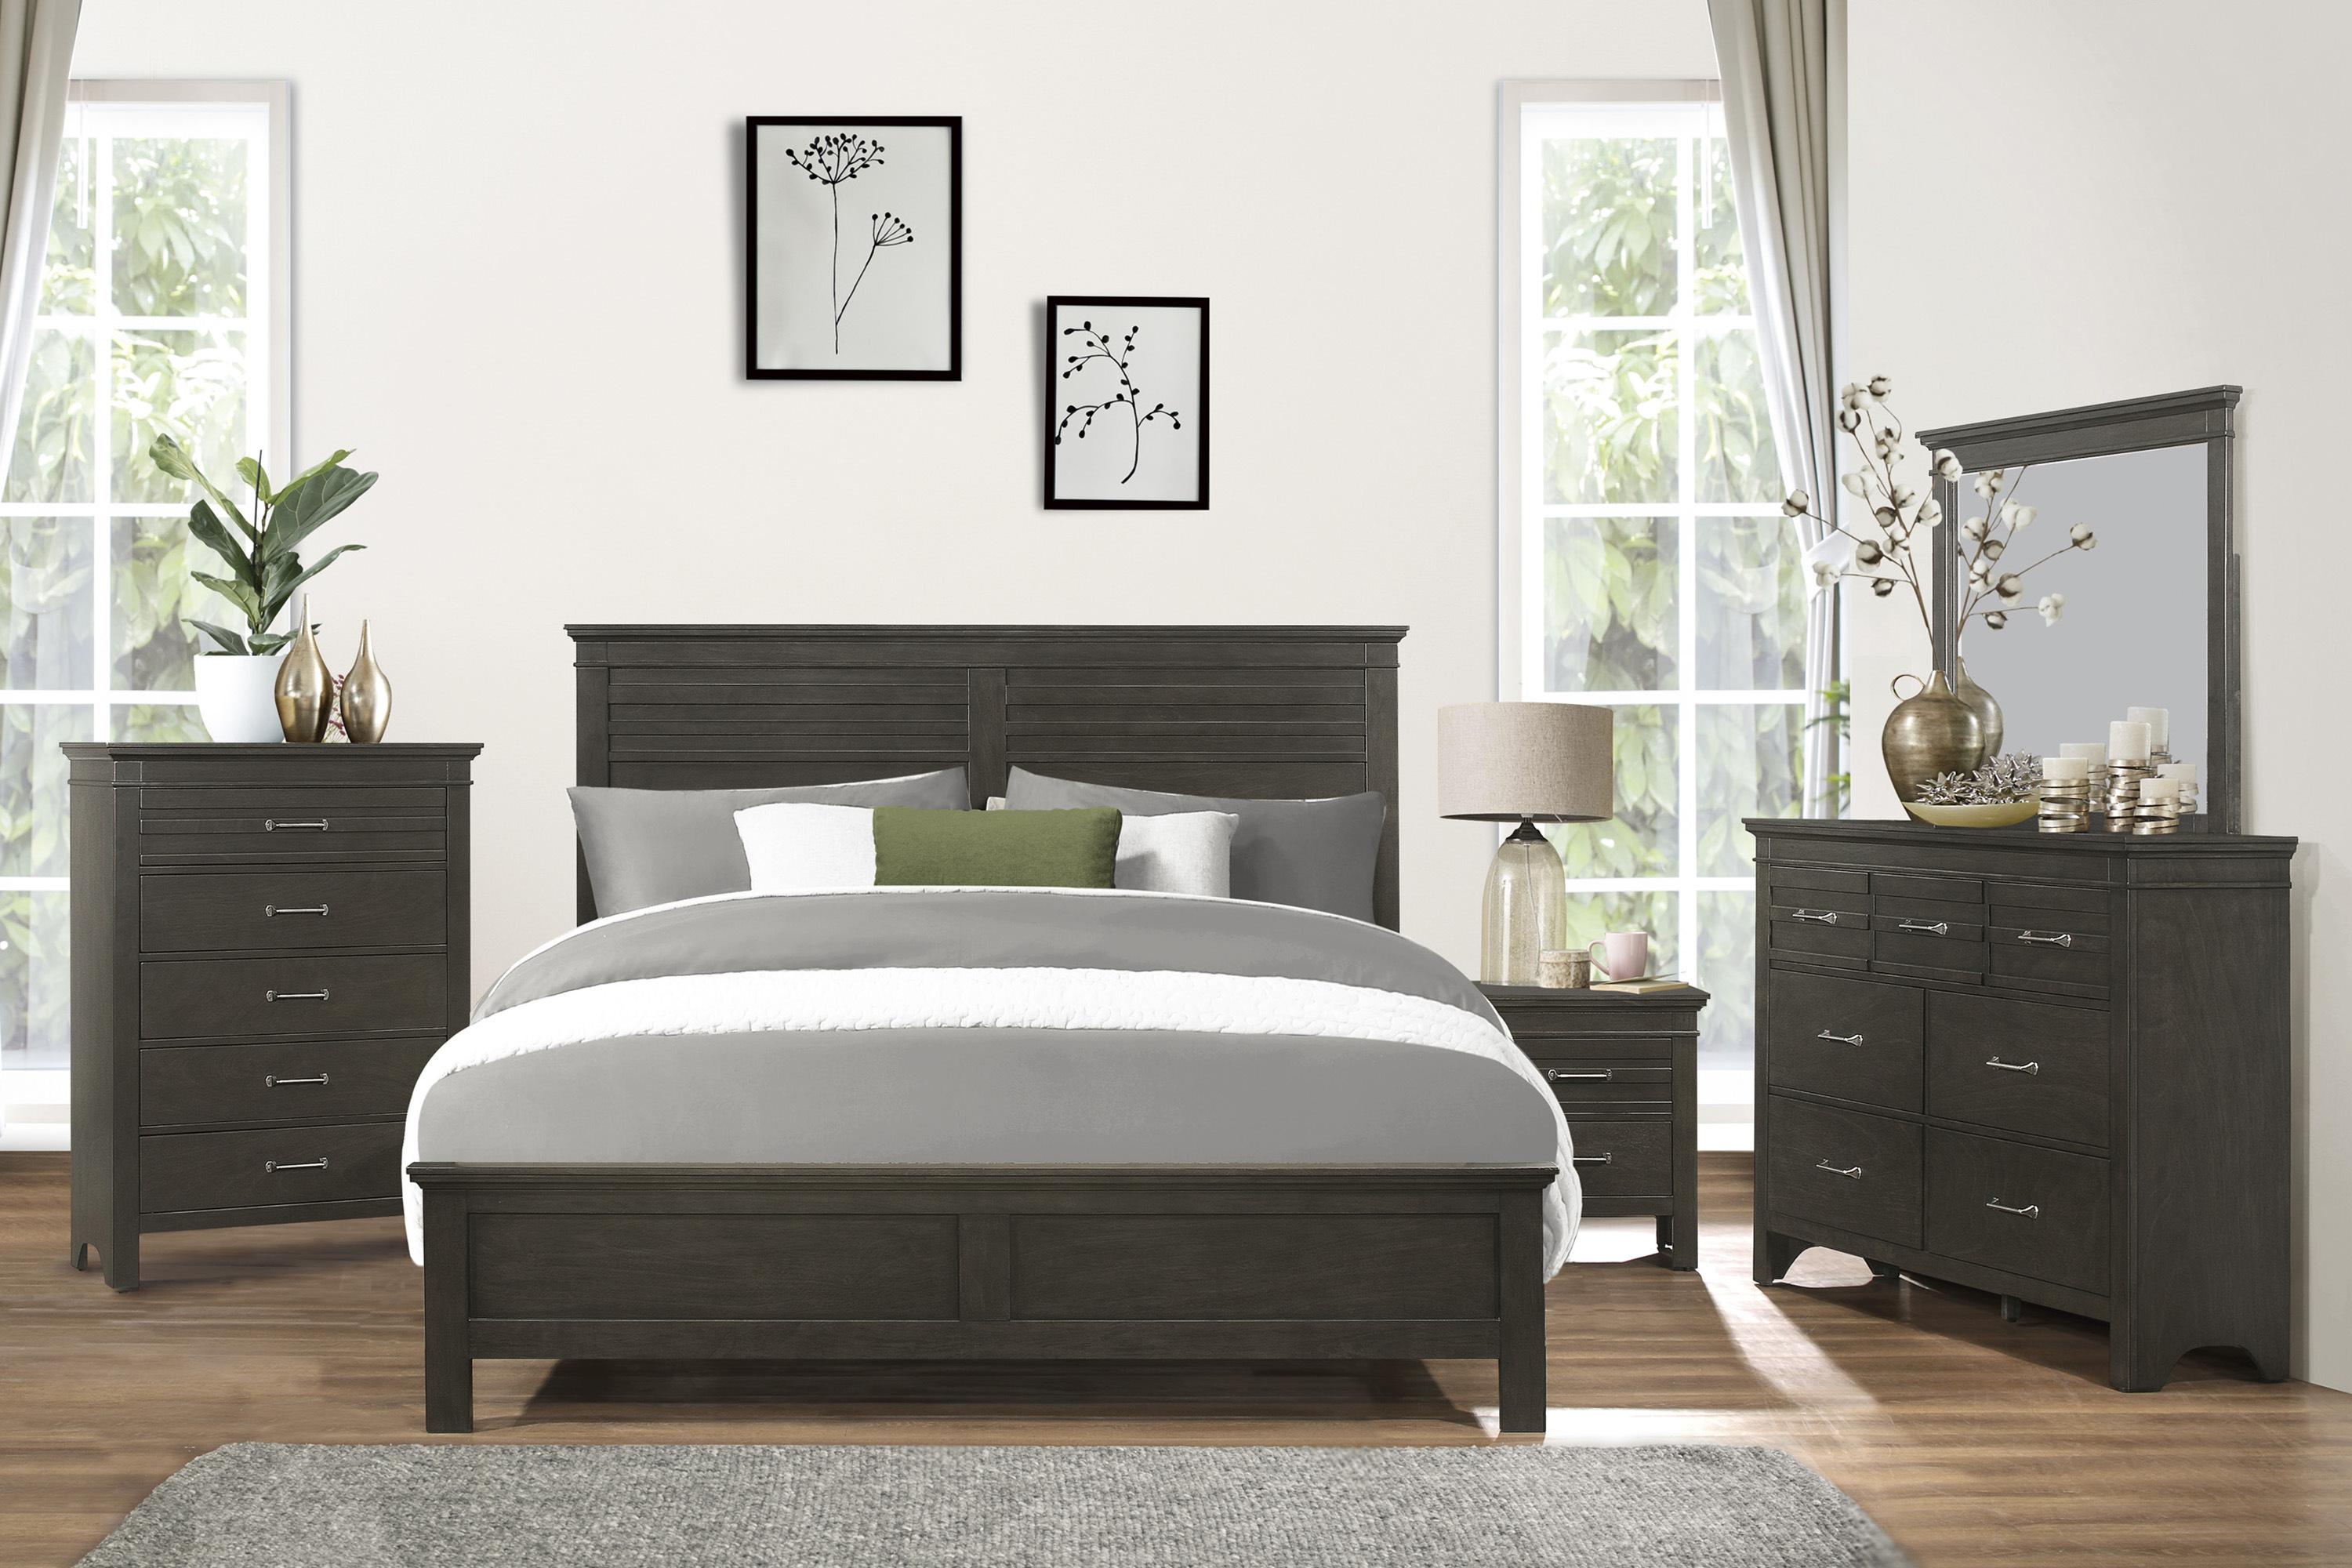 Transitional Bedroom Set 1675-1-6PC-6PC Blaire Farm 1675-1-6PC in Charcoal 